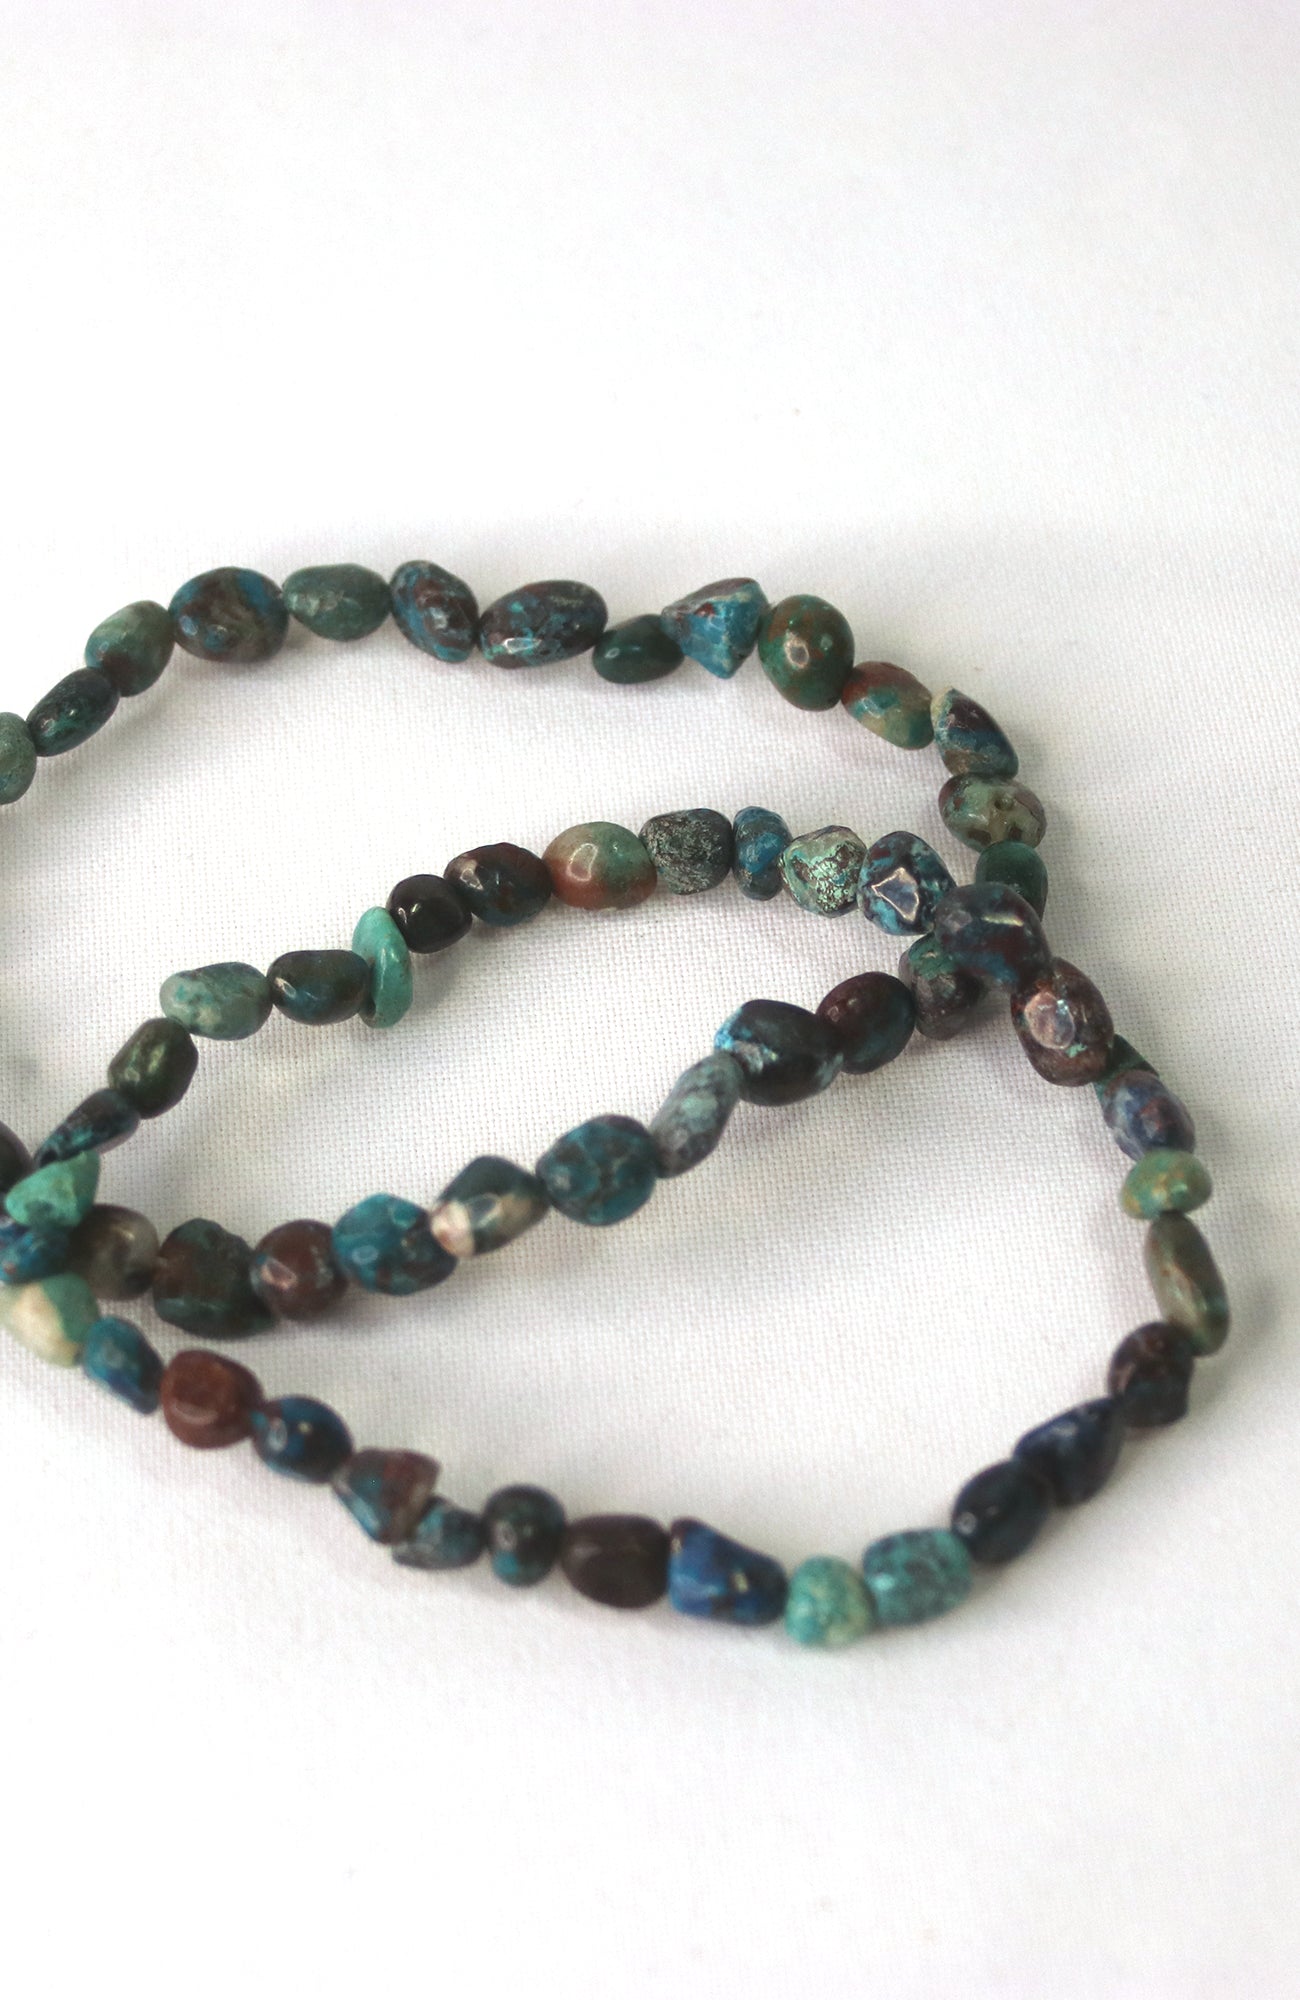 Chrysocolla 6-8mm Nugget Bead Bracelet for wrists up to 20cm